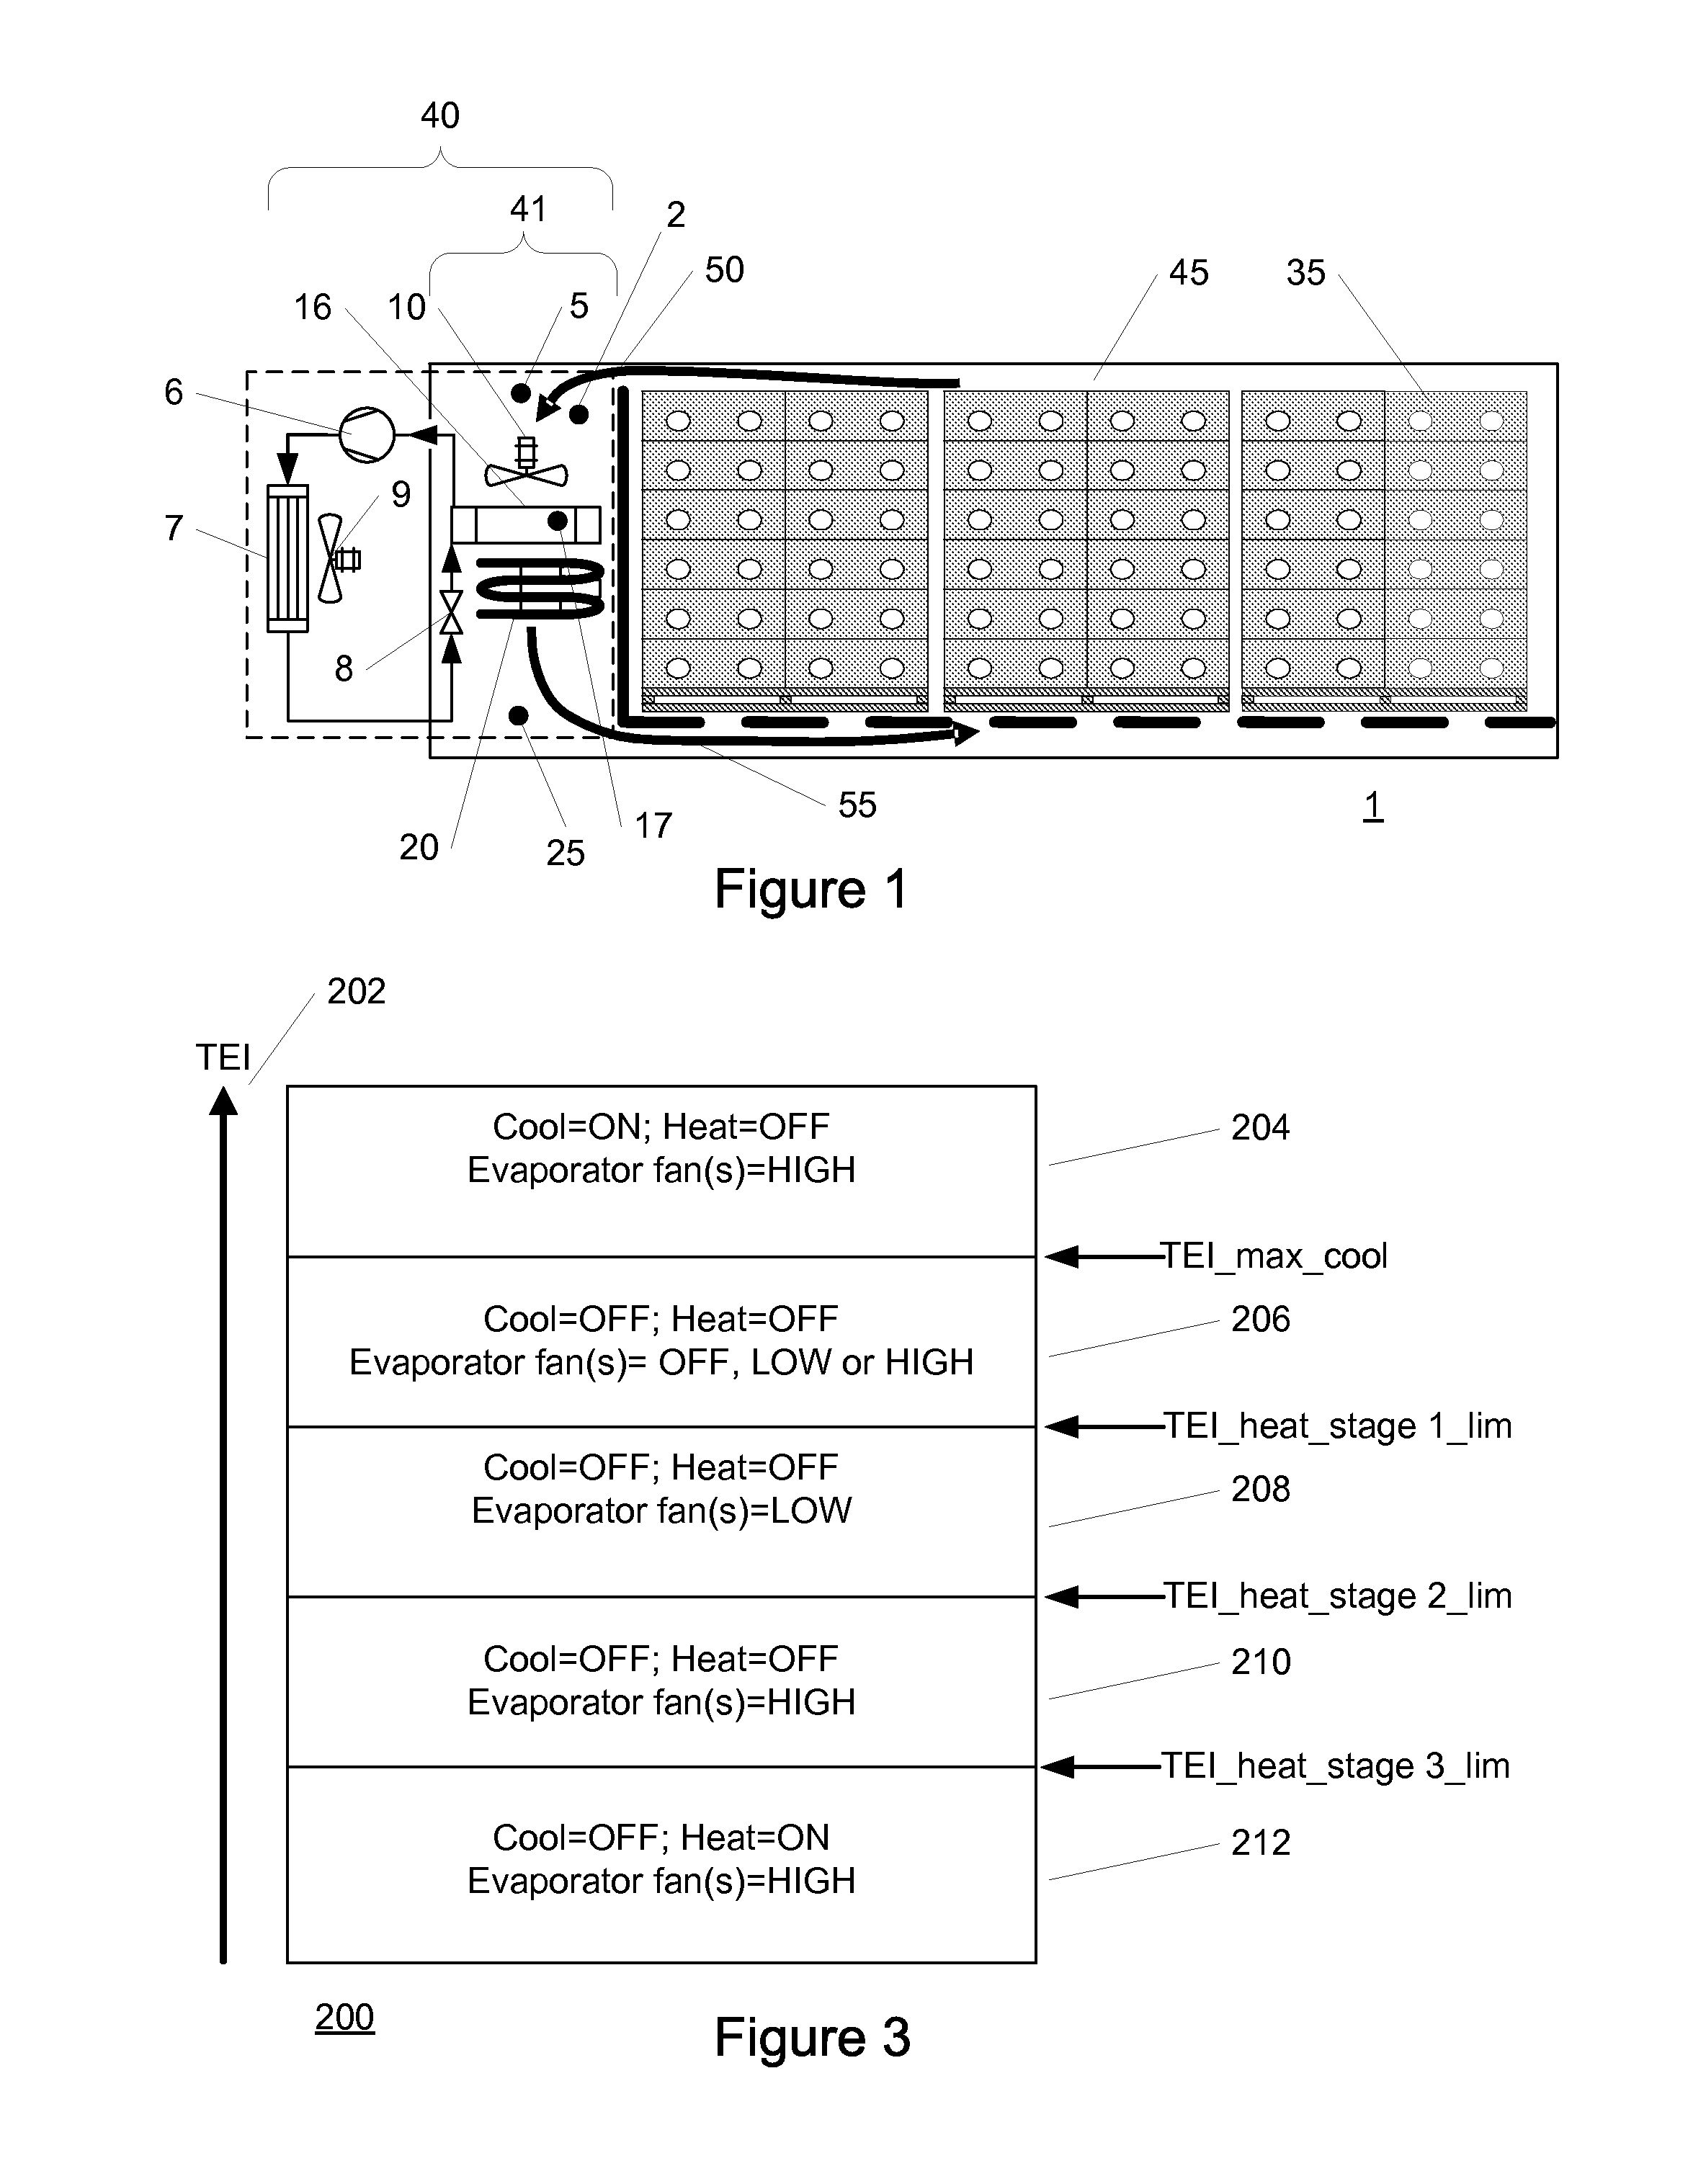 Humidity control in a refrigerated transport container with an intermittently operated compressor